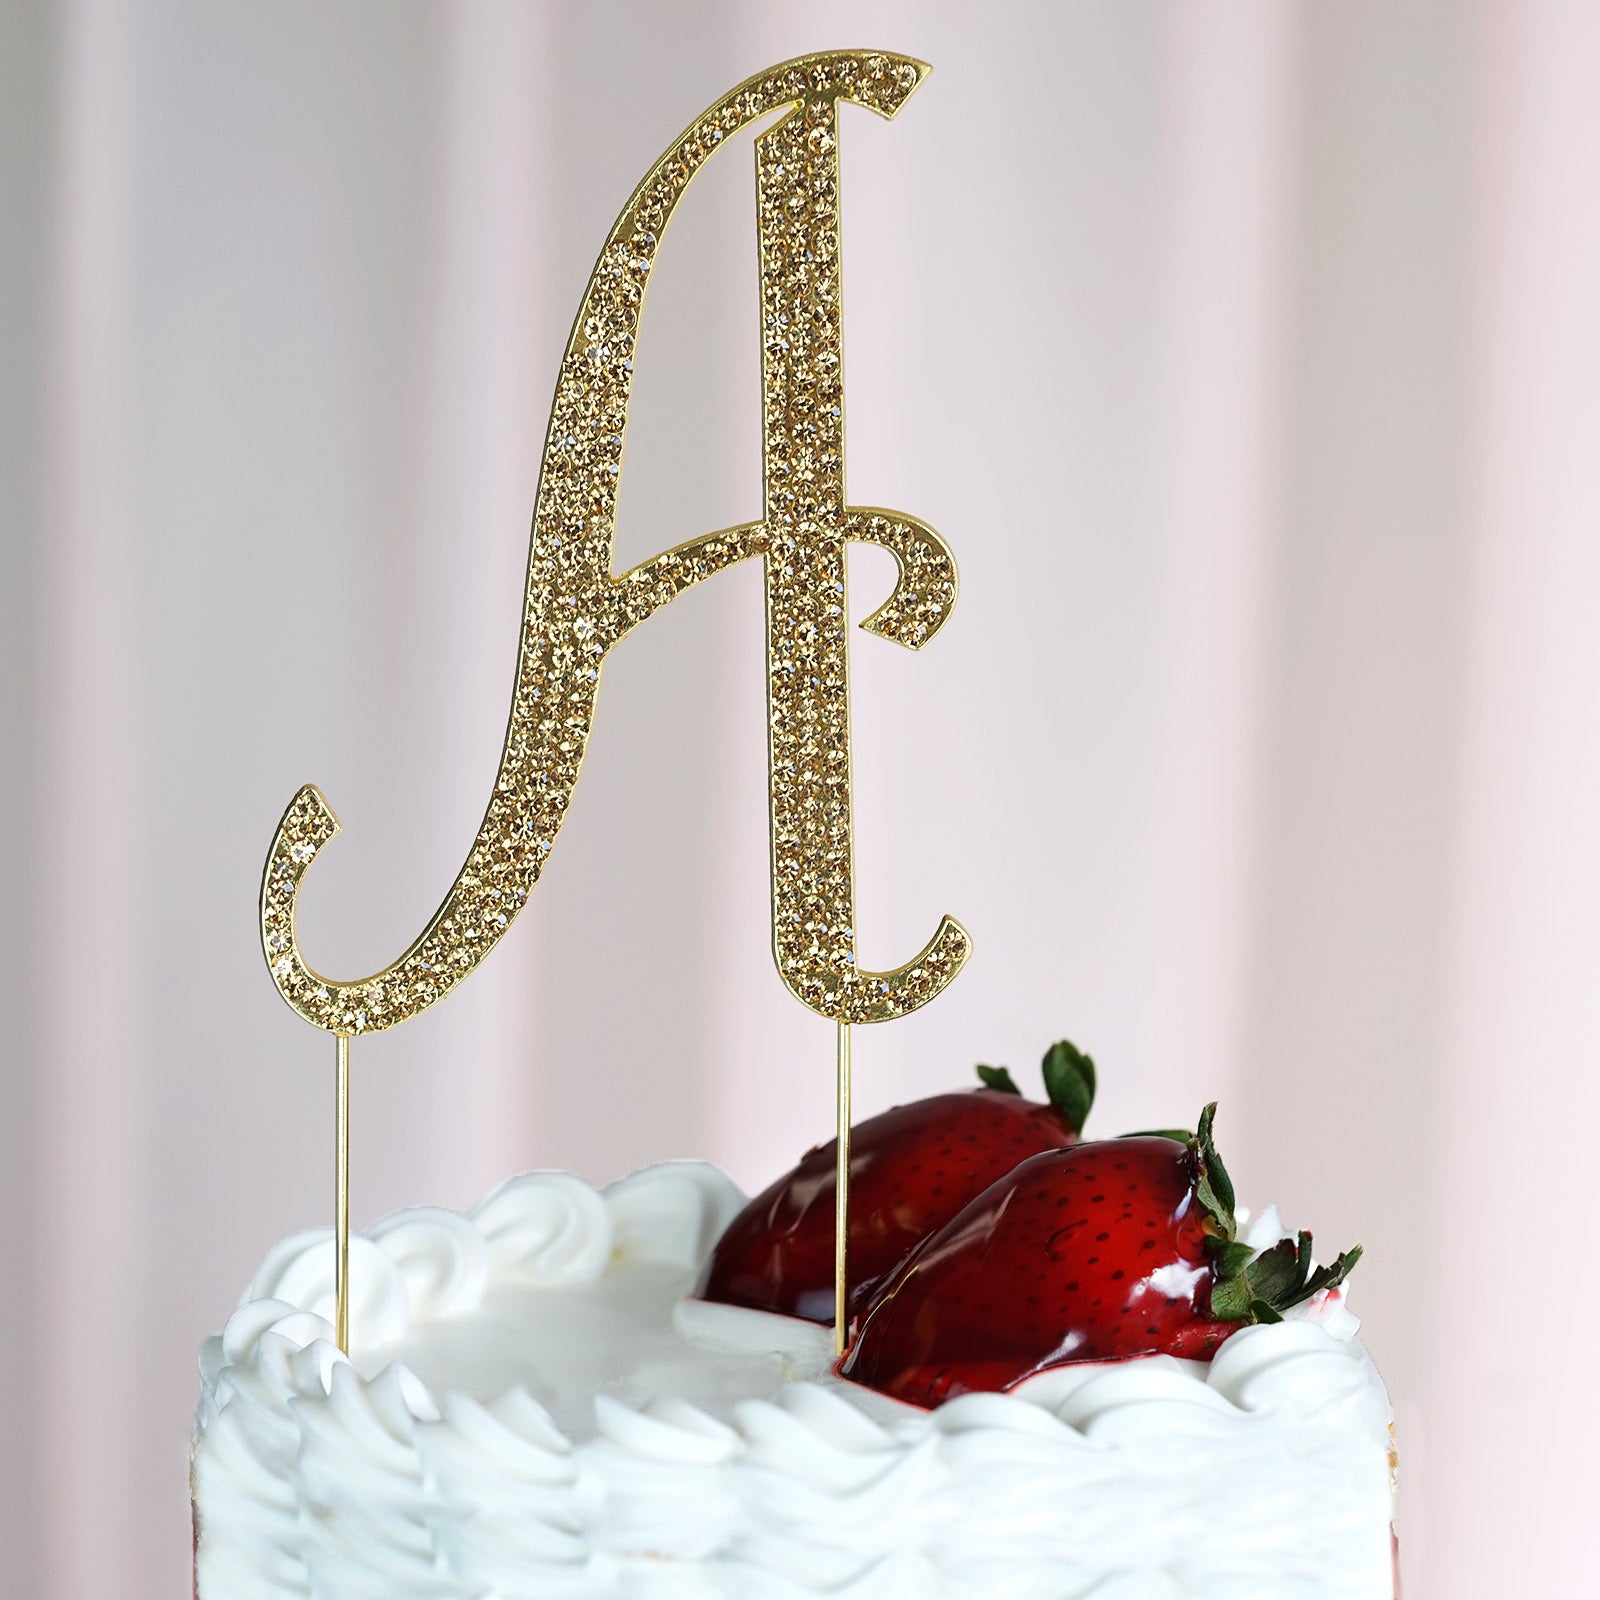 Chocolate and Cherry Happy Birthday a Letter Cake Stock Image - Image of  birthday, food: 160618399